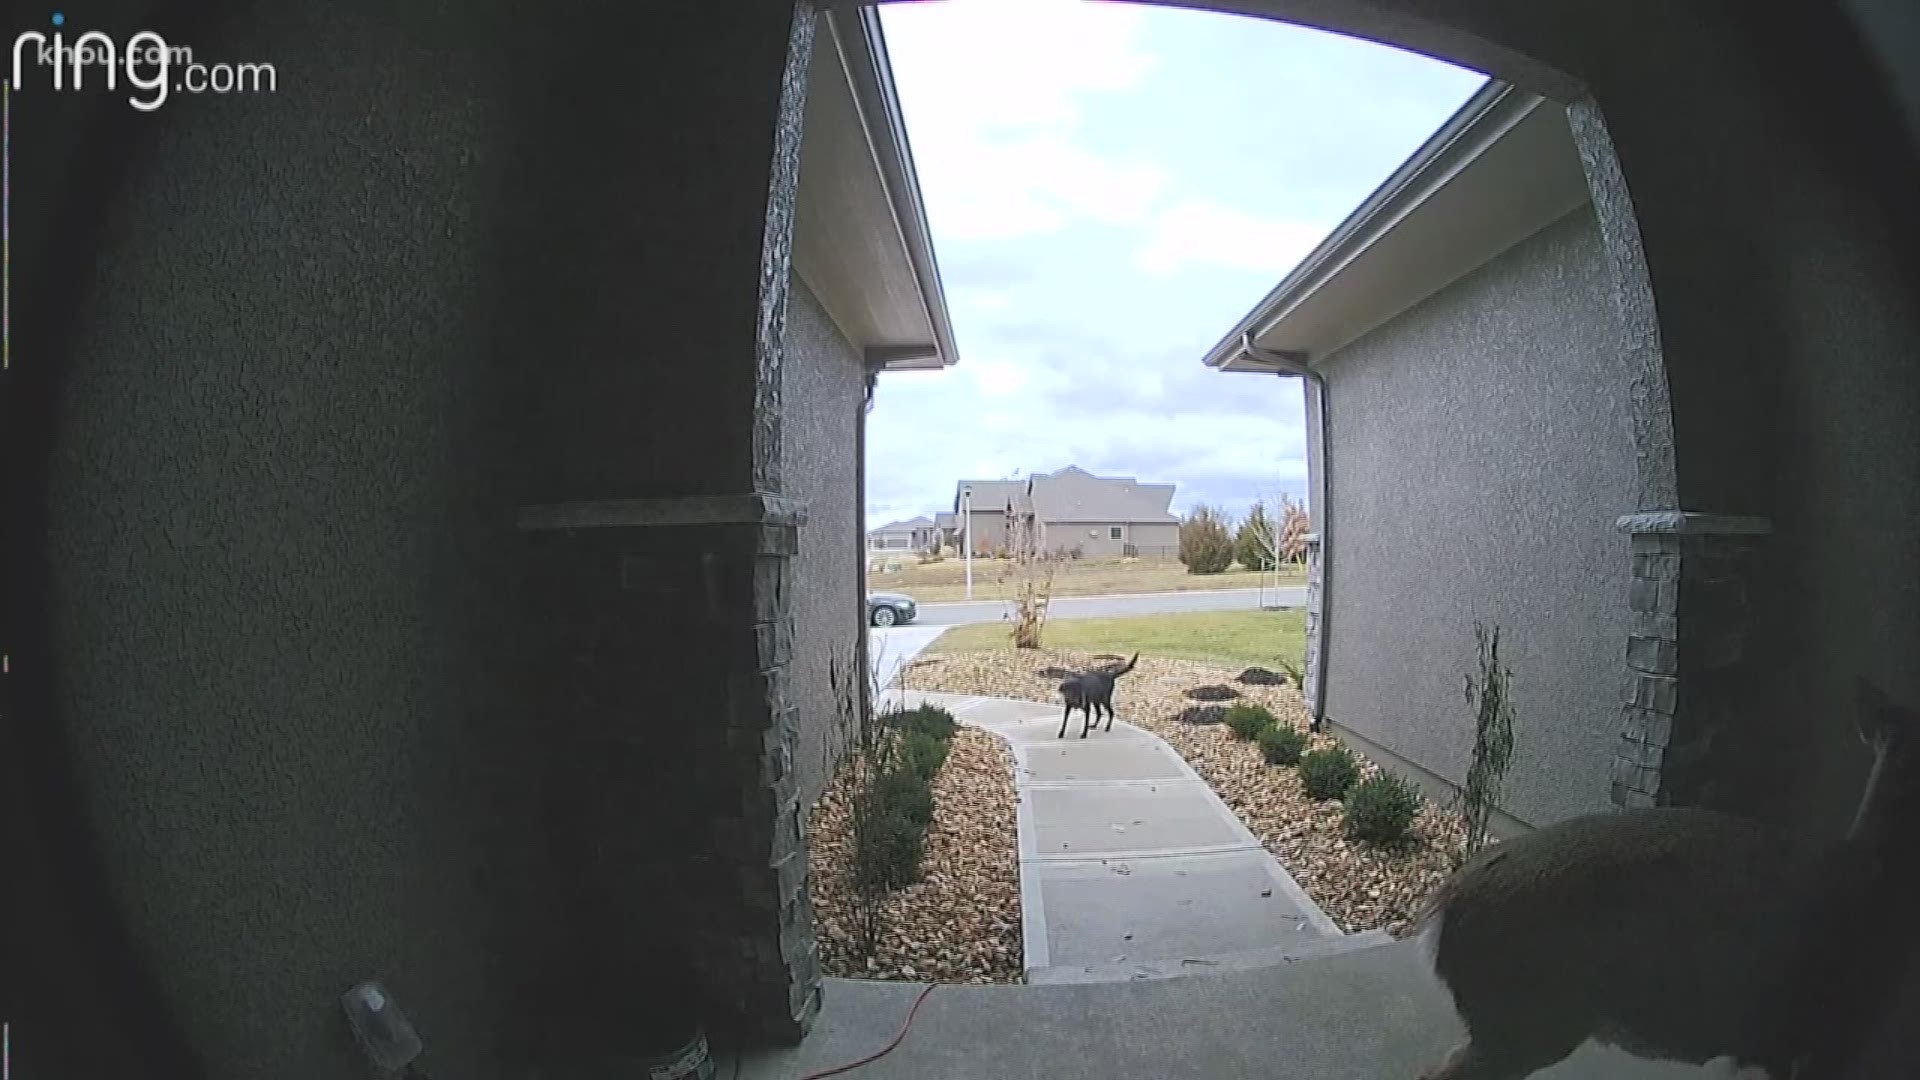 A Ring doorbell camera caught video of a deer jumping over a dog in Olathe, Kan.